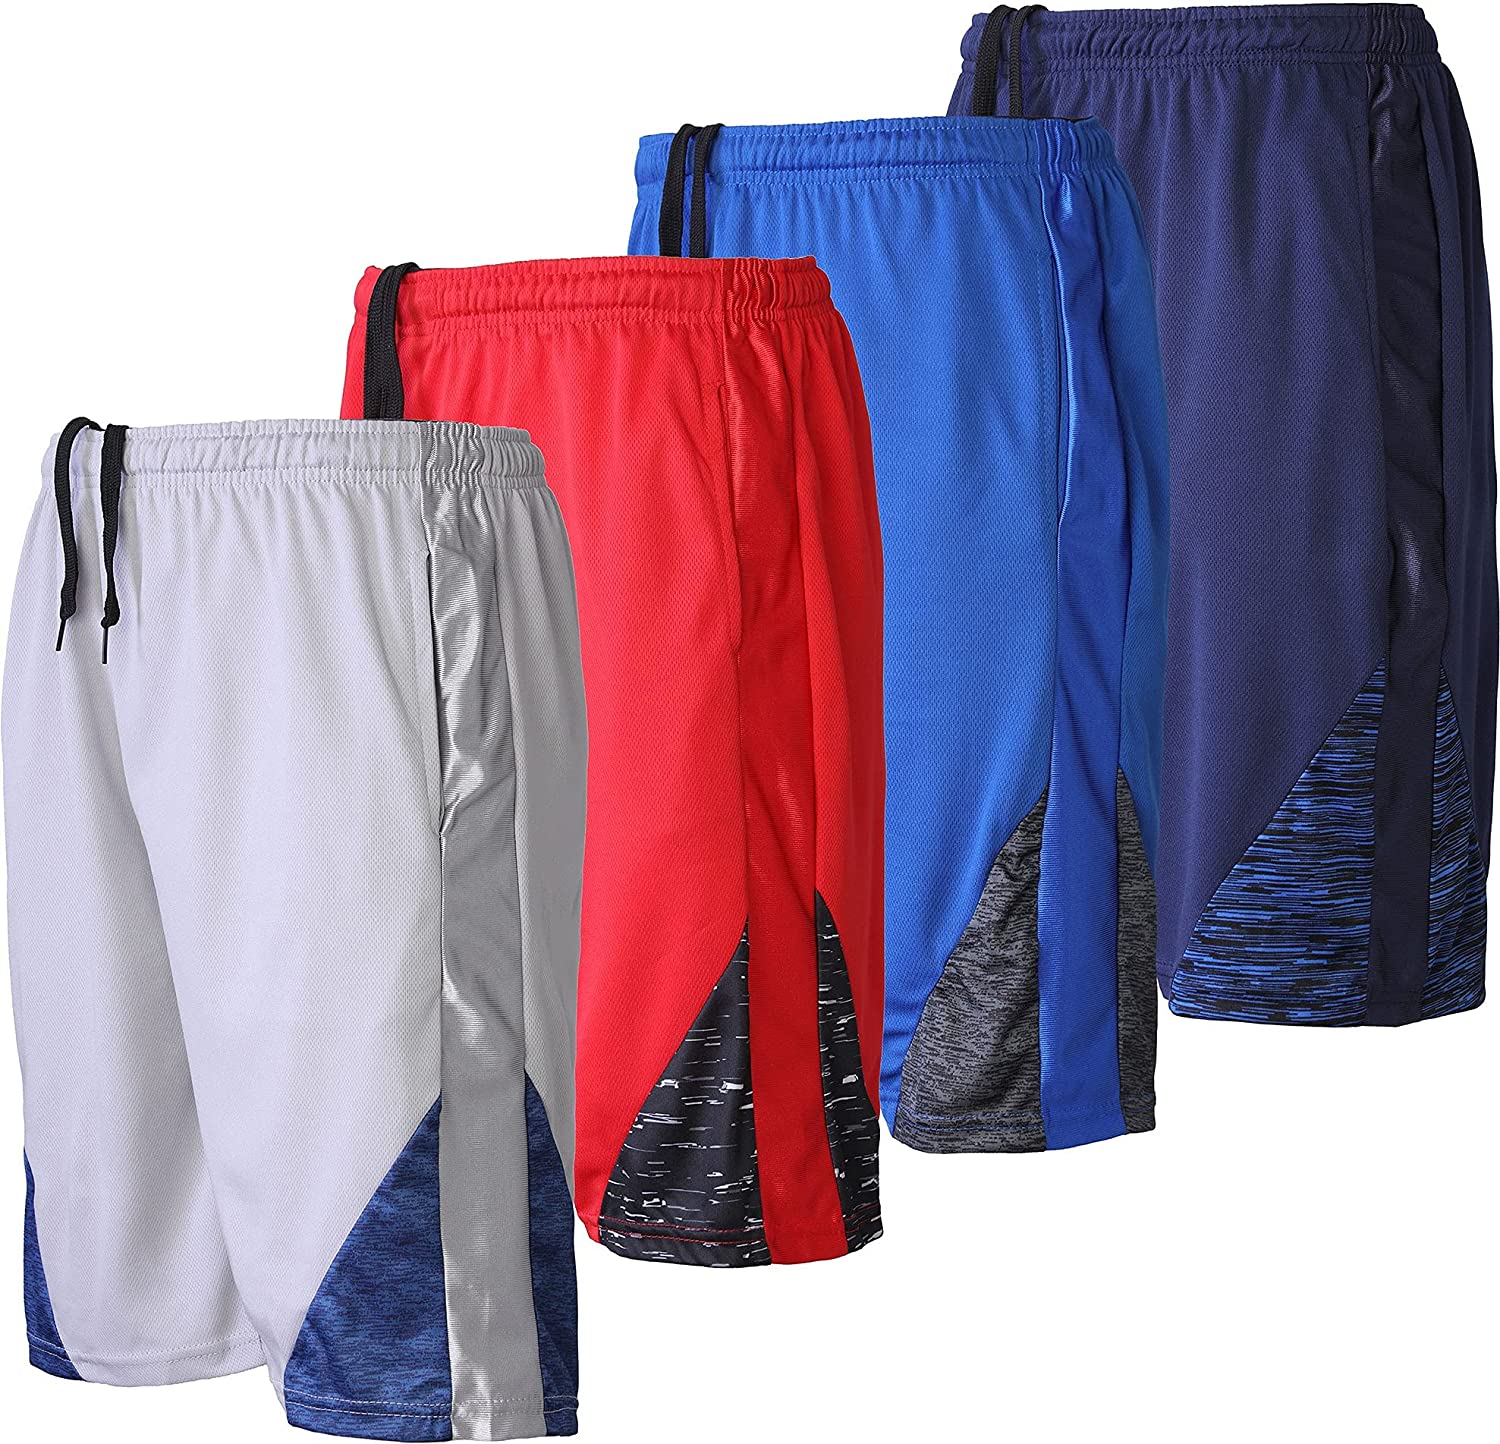 Active Club Men's Athletic Gym Shorts with Pockets Quick Dry Running Workout Training Basketball Shorts 